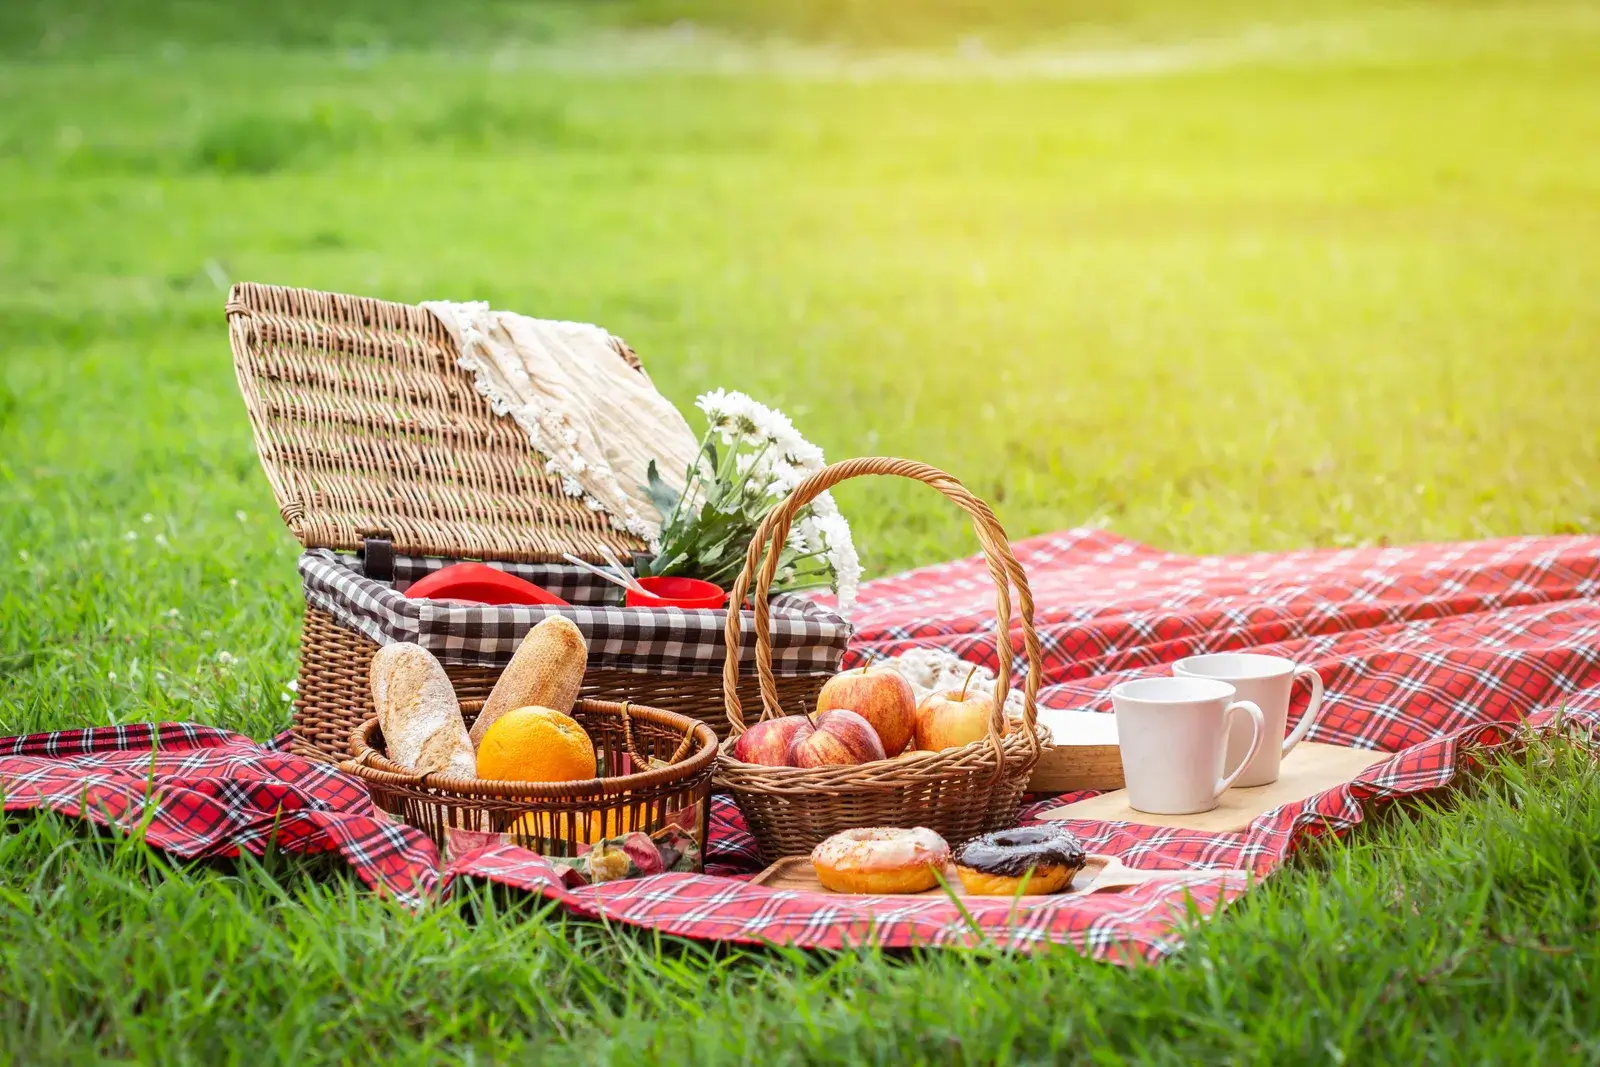 Picnic in the grass